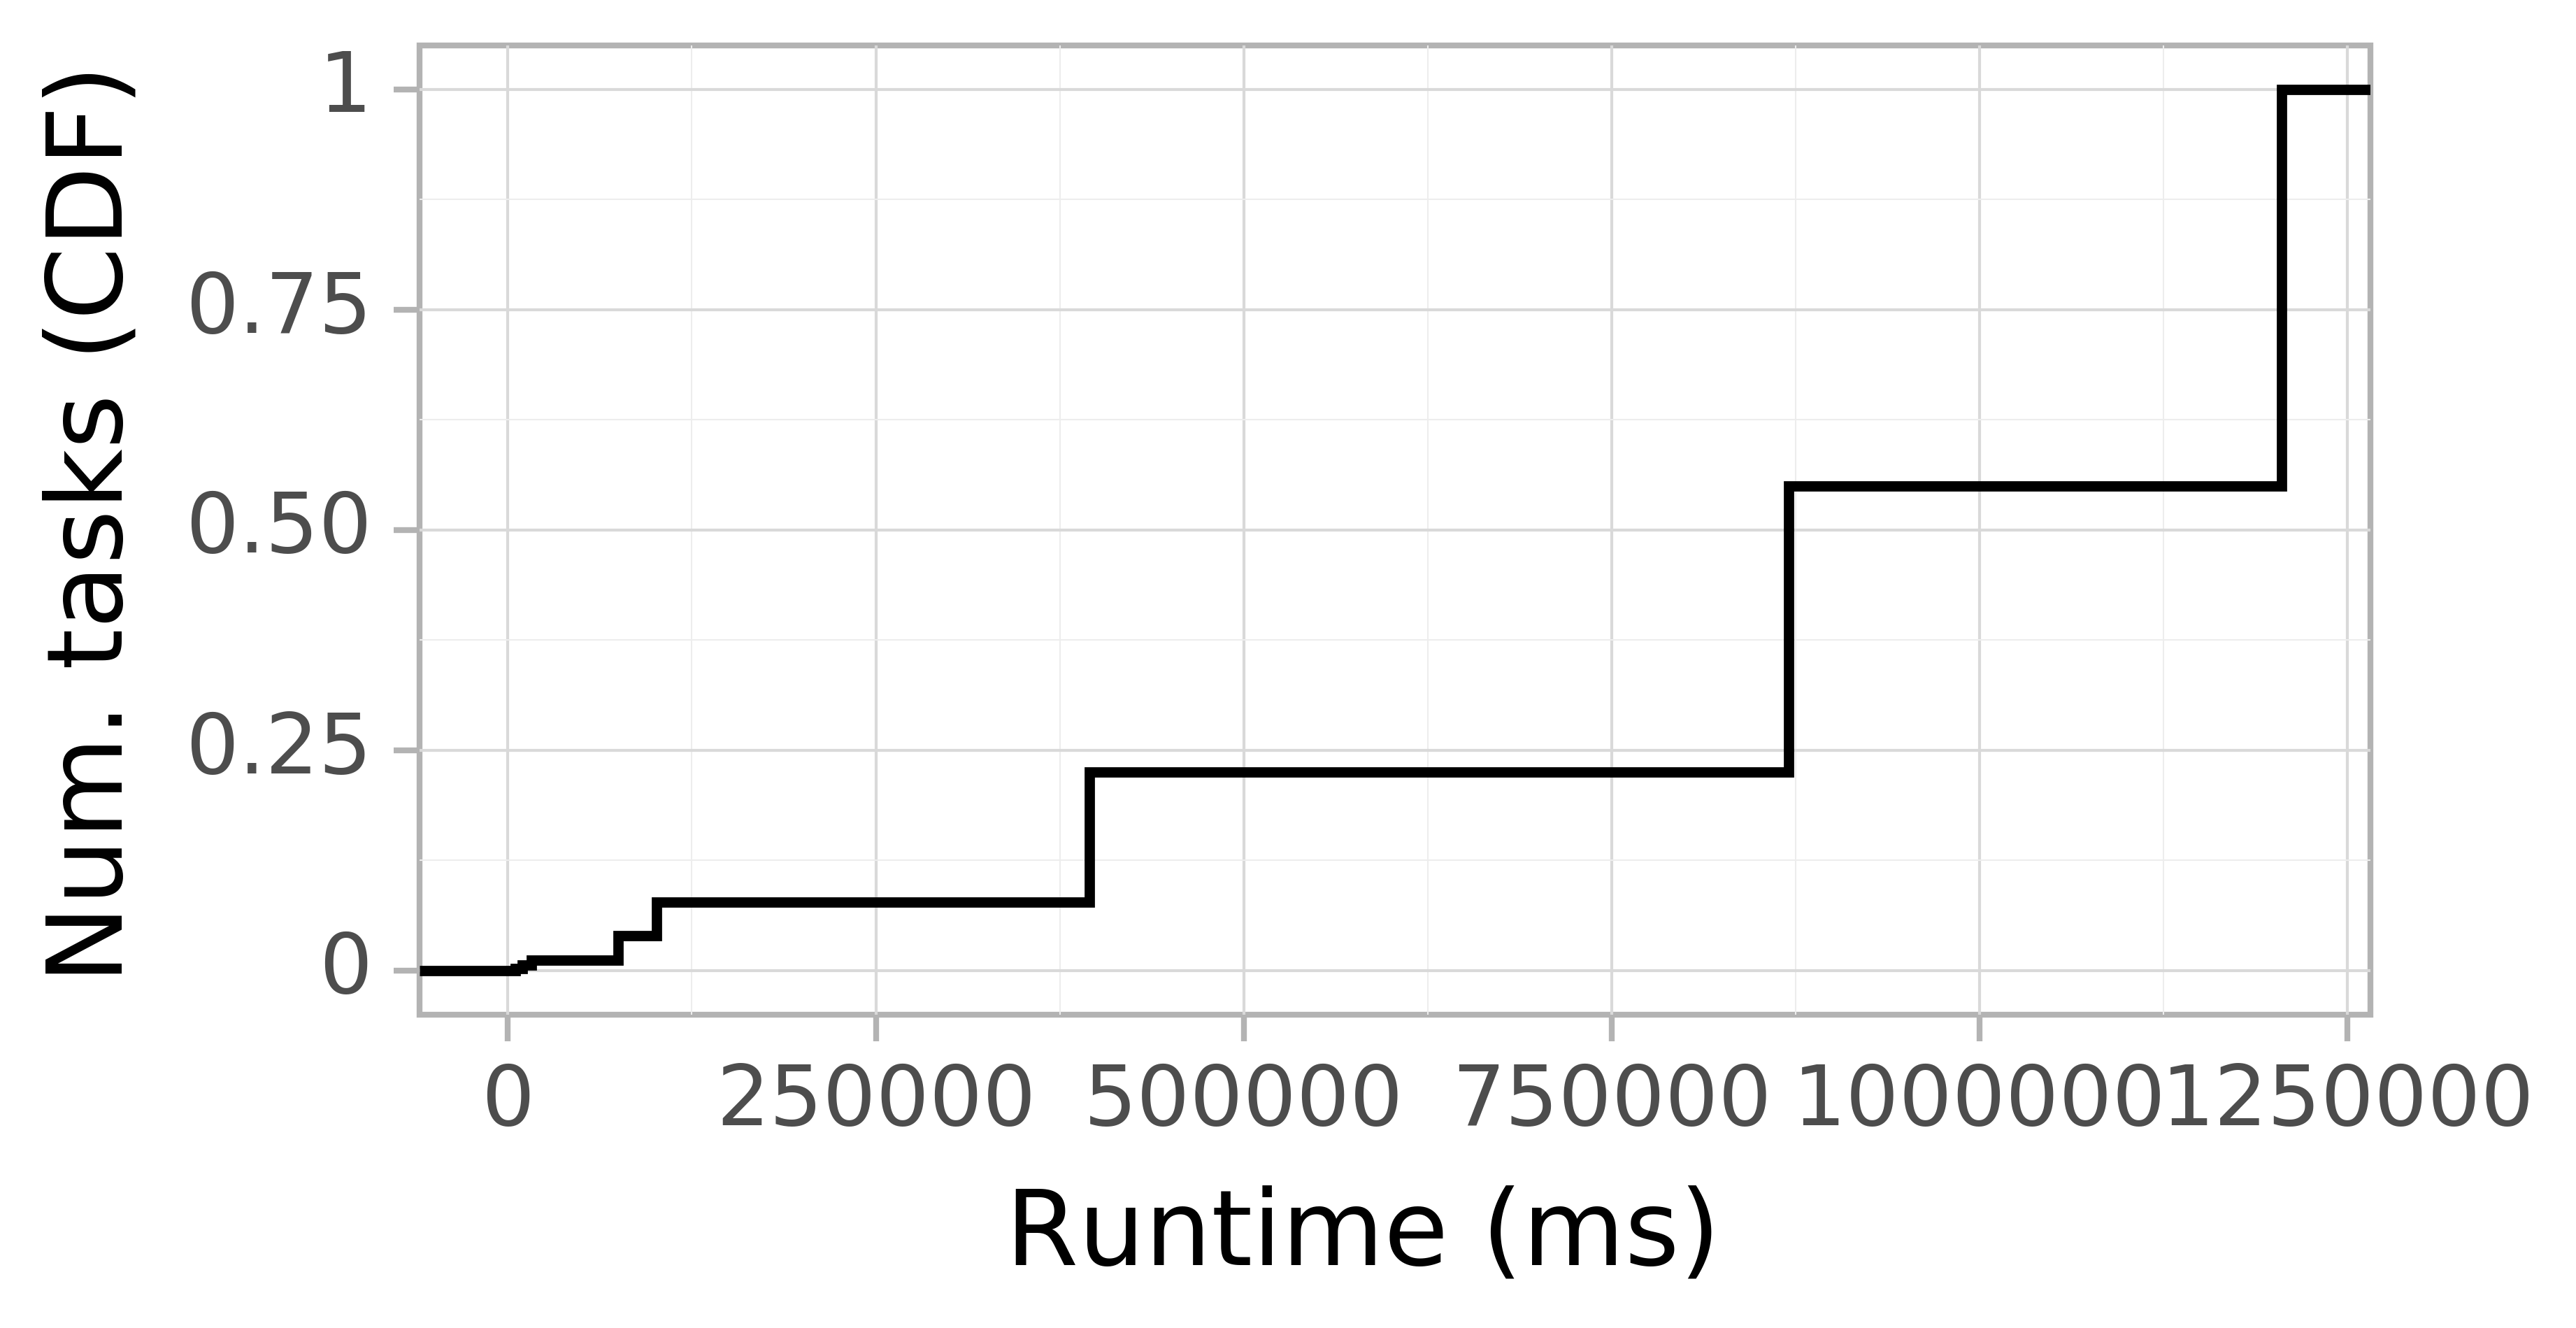 Task runtime CDF graph for the Pegasus_P4 trace.